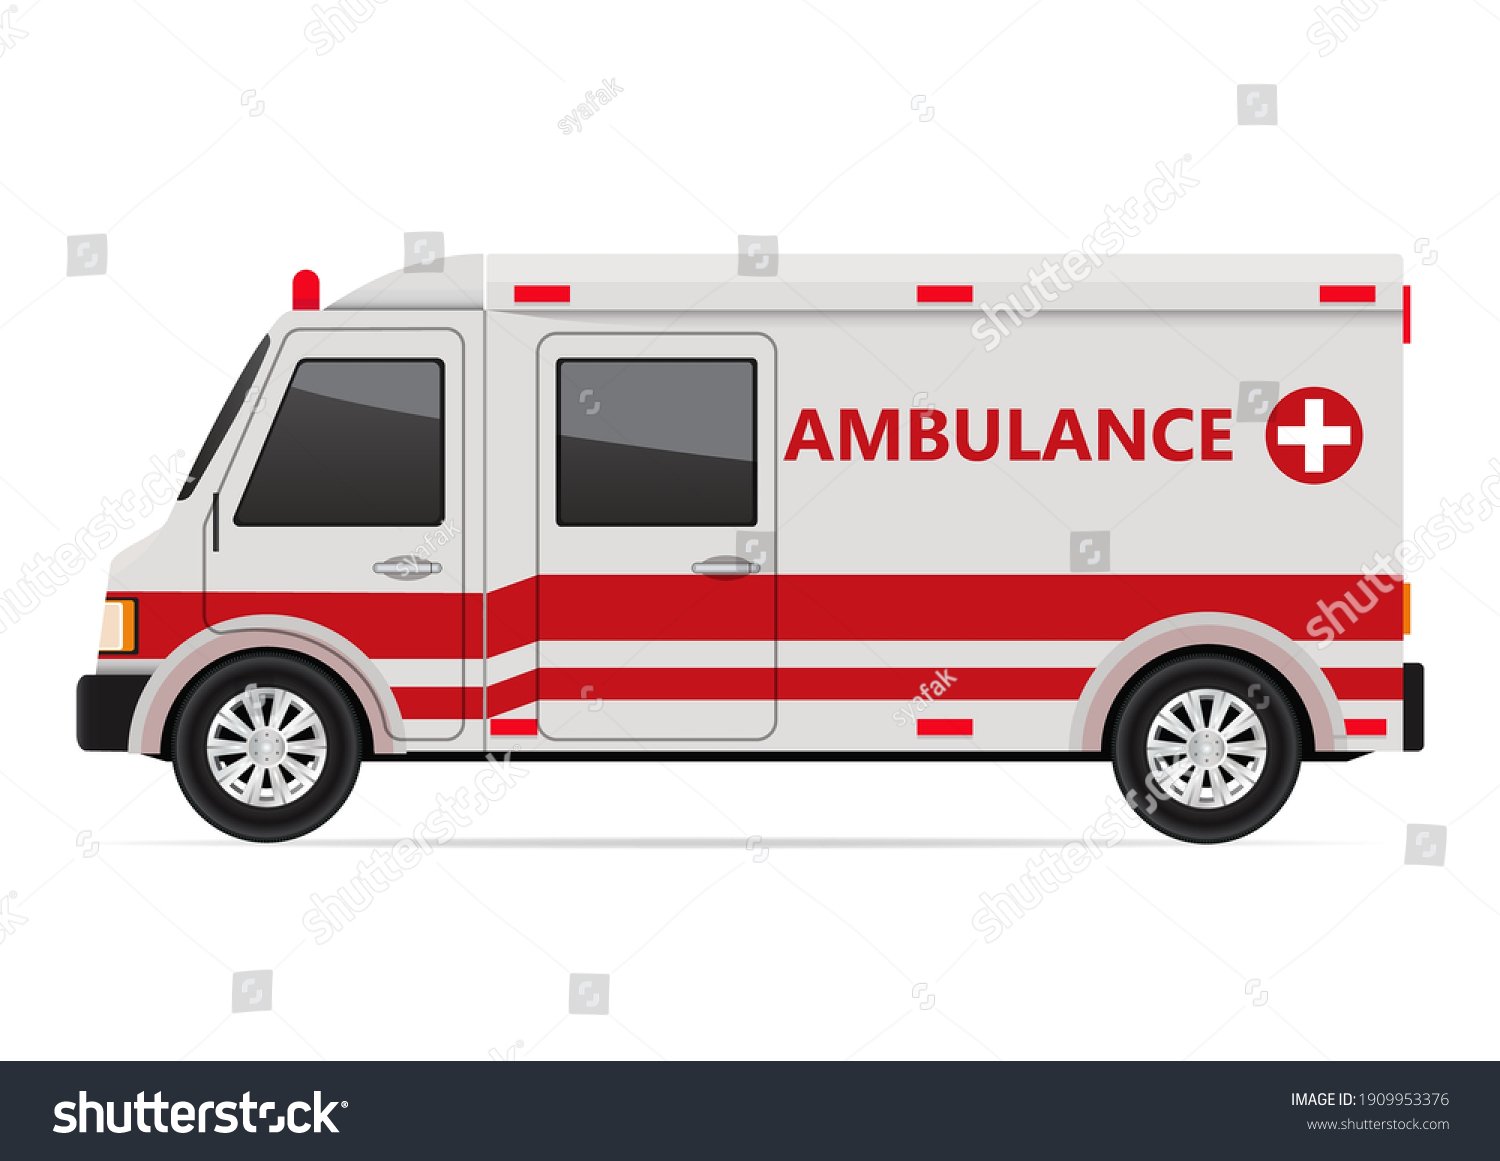 Ambulance isolated Images, Stock Photos & Vectors | Shutterstock